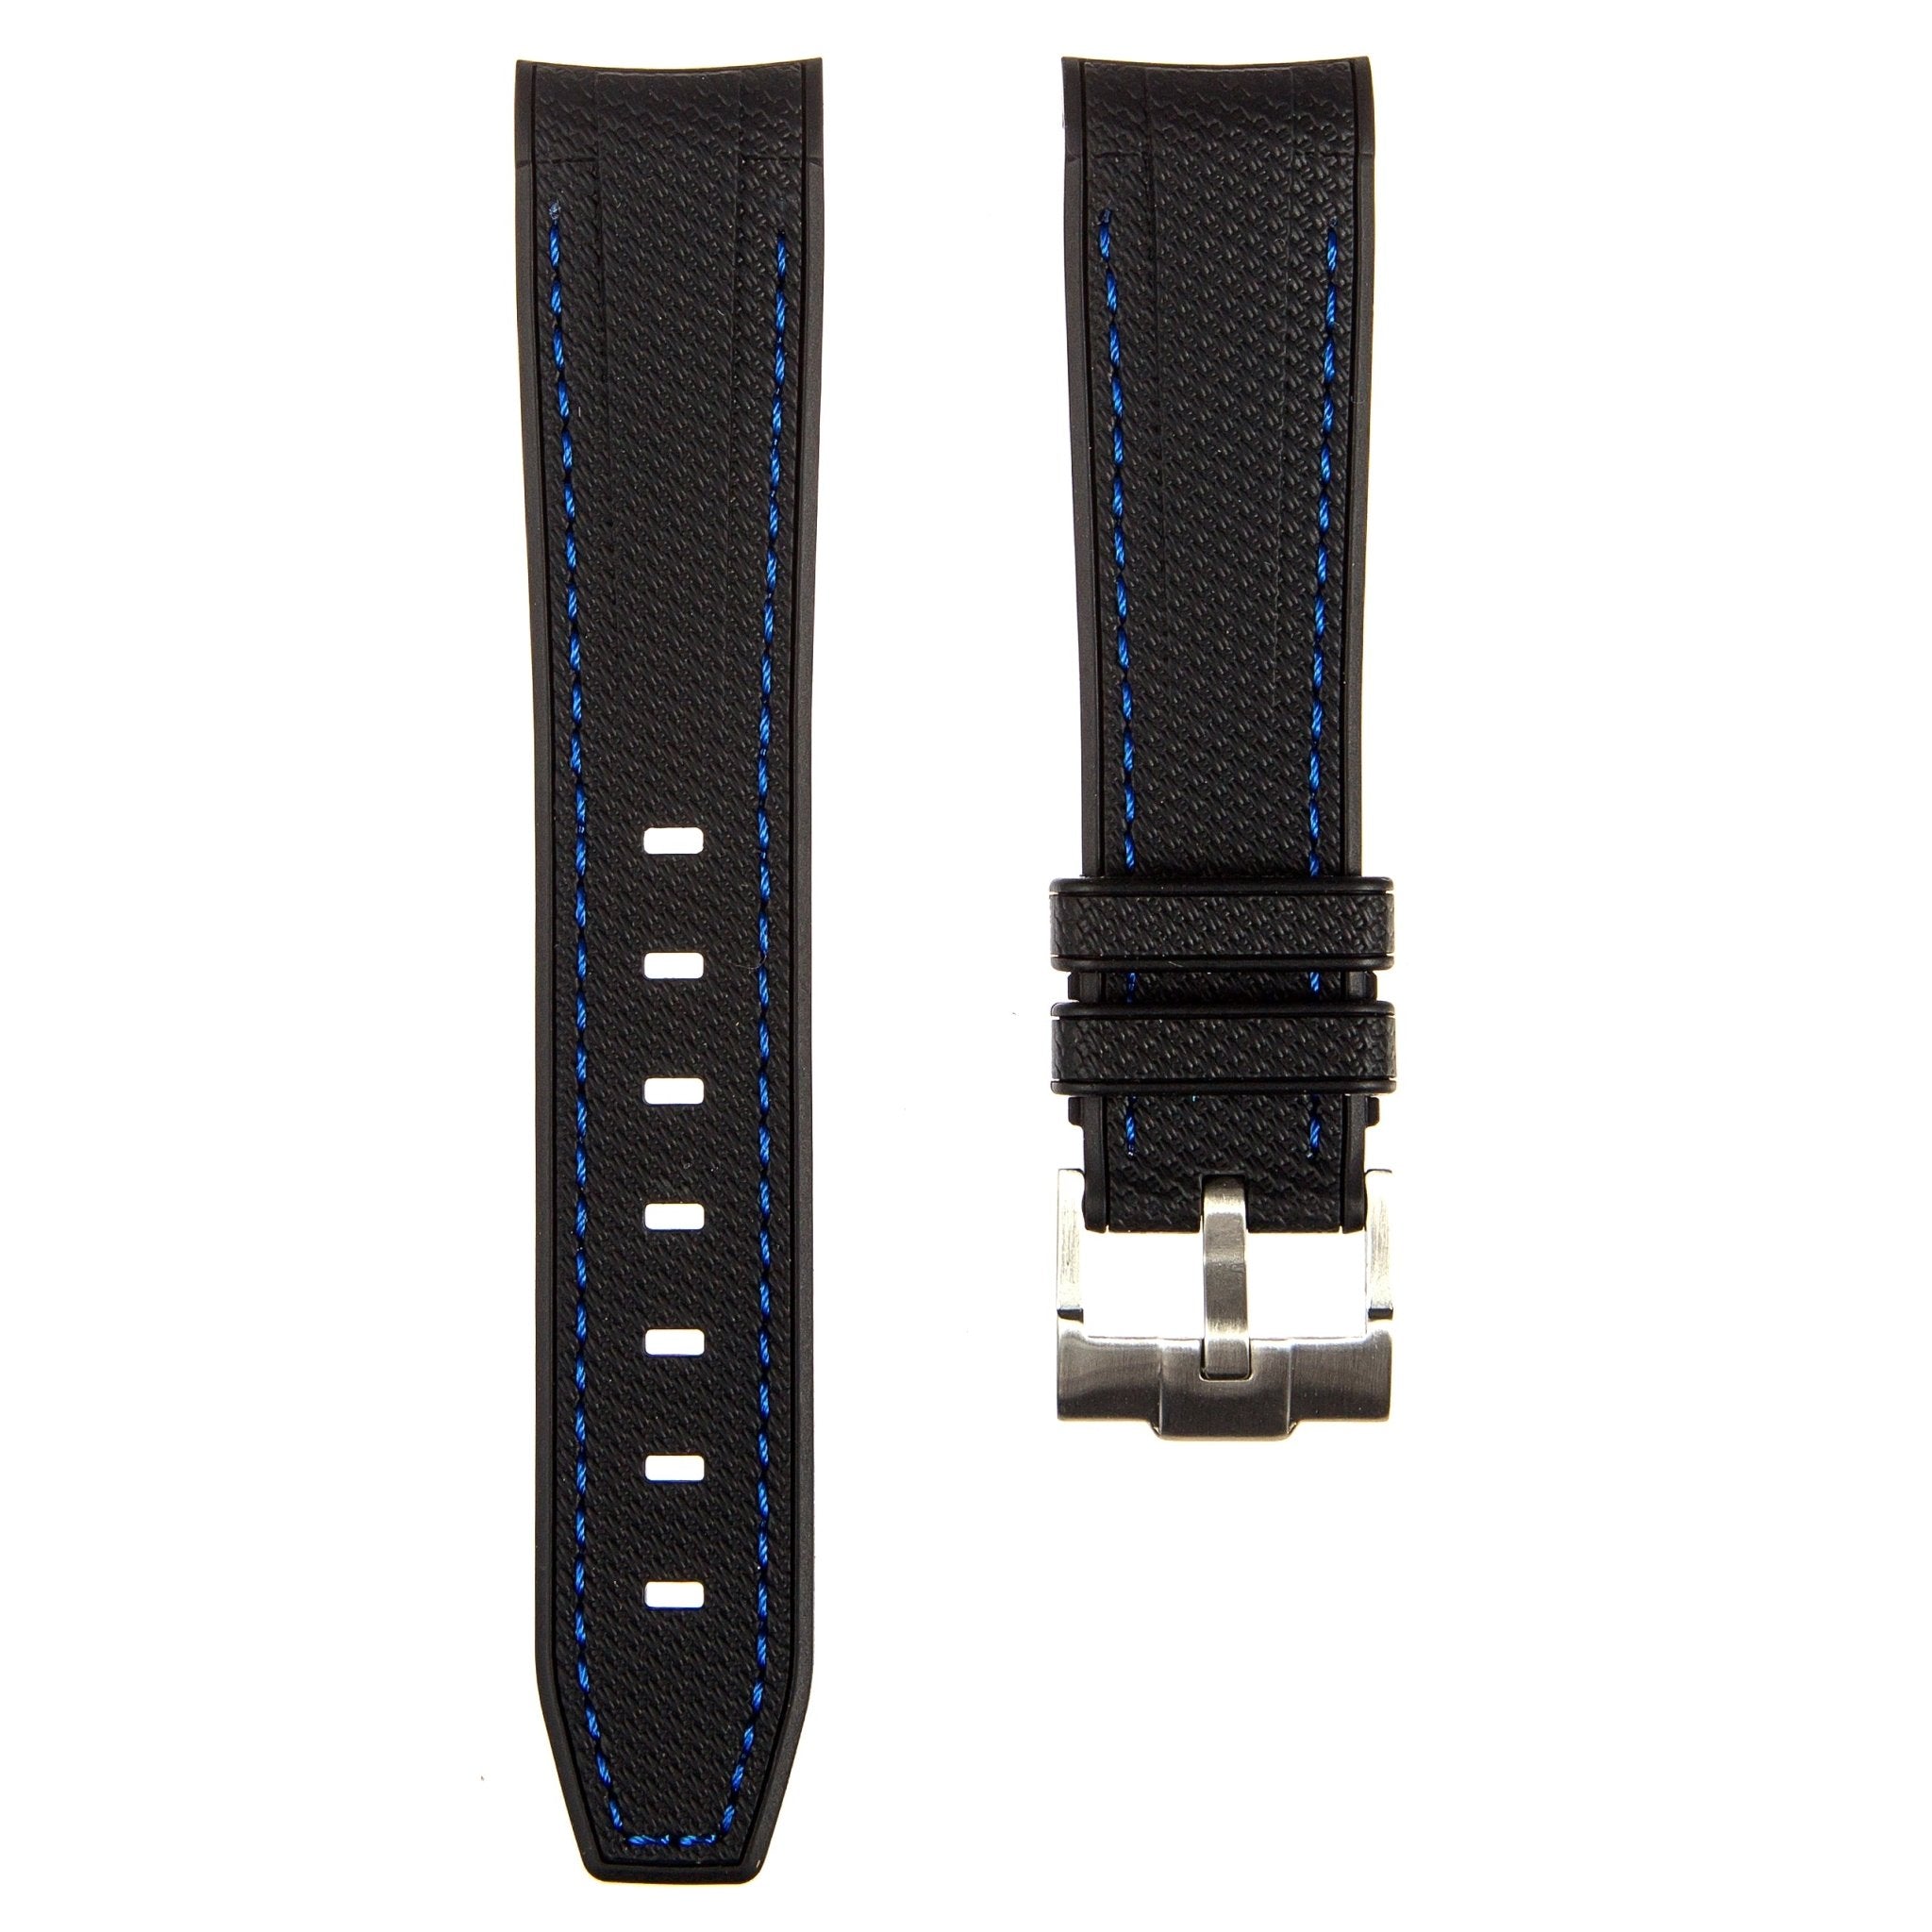 Textured Curved End Premium Silicone Strap - Black with Blue Stitch (2405) -StrapSeeker